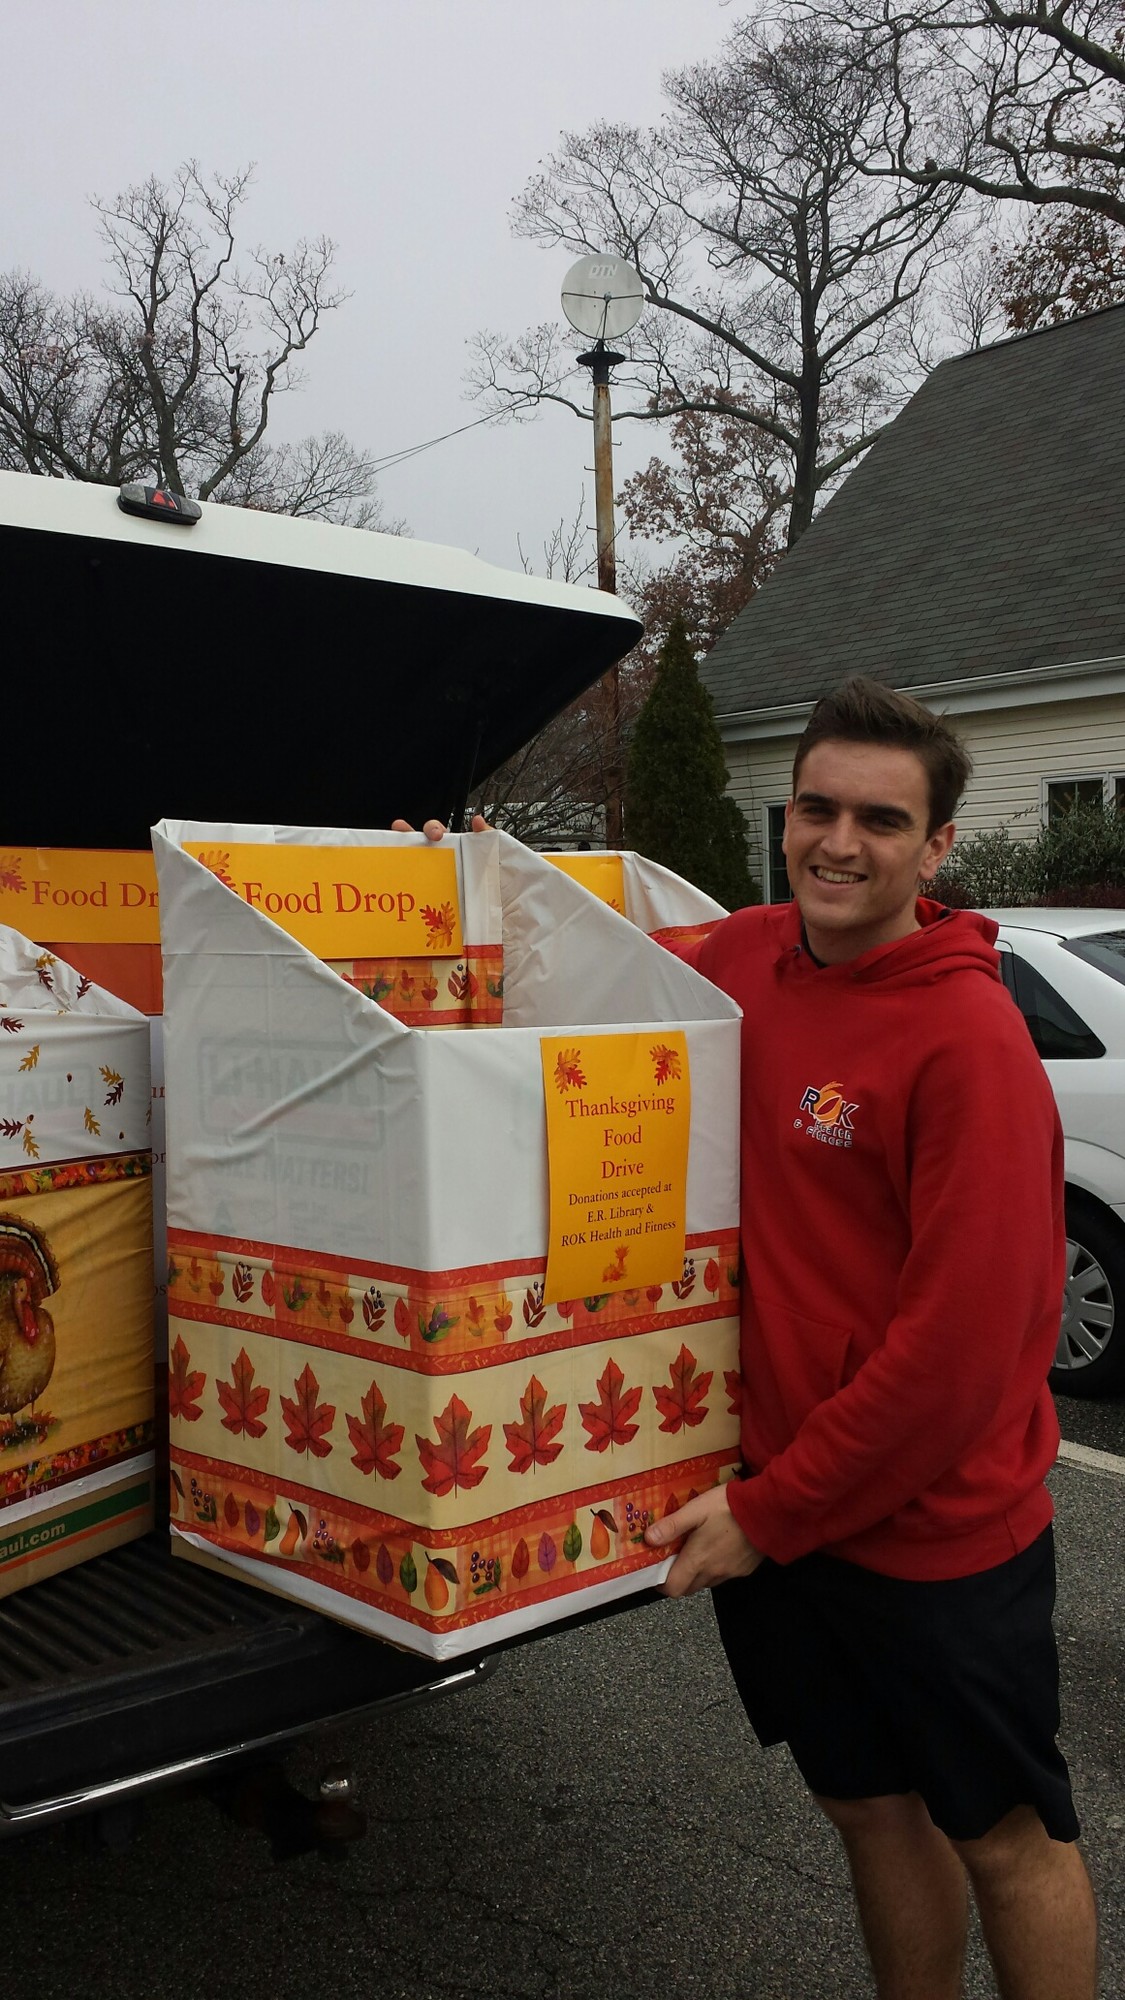 Craig D’Urso helped unload the collection boxes from the truck when they arrived at the Senior Center.